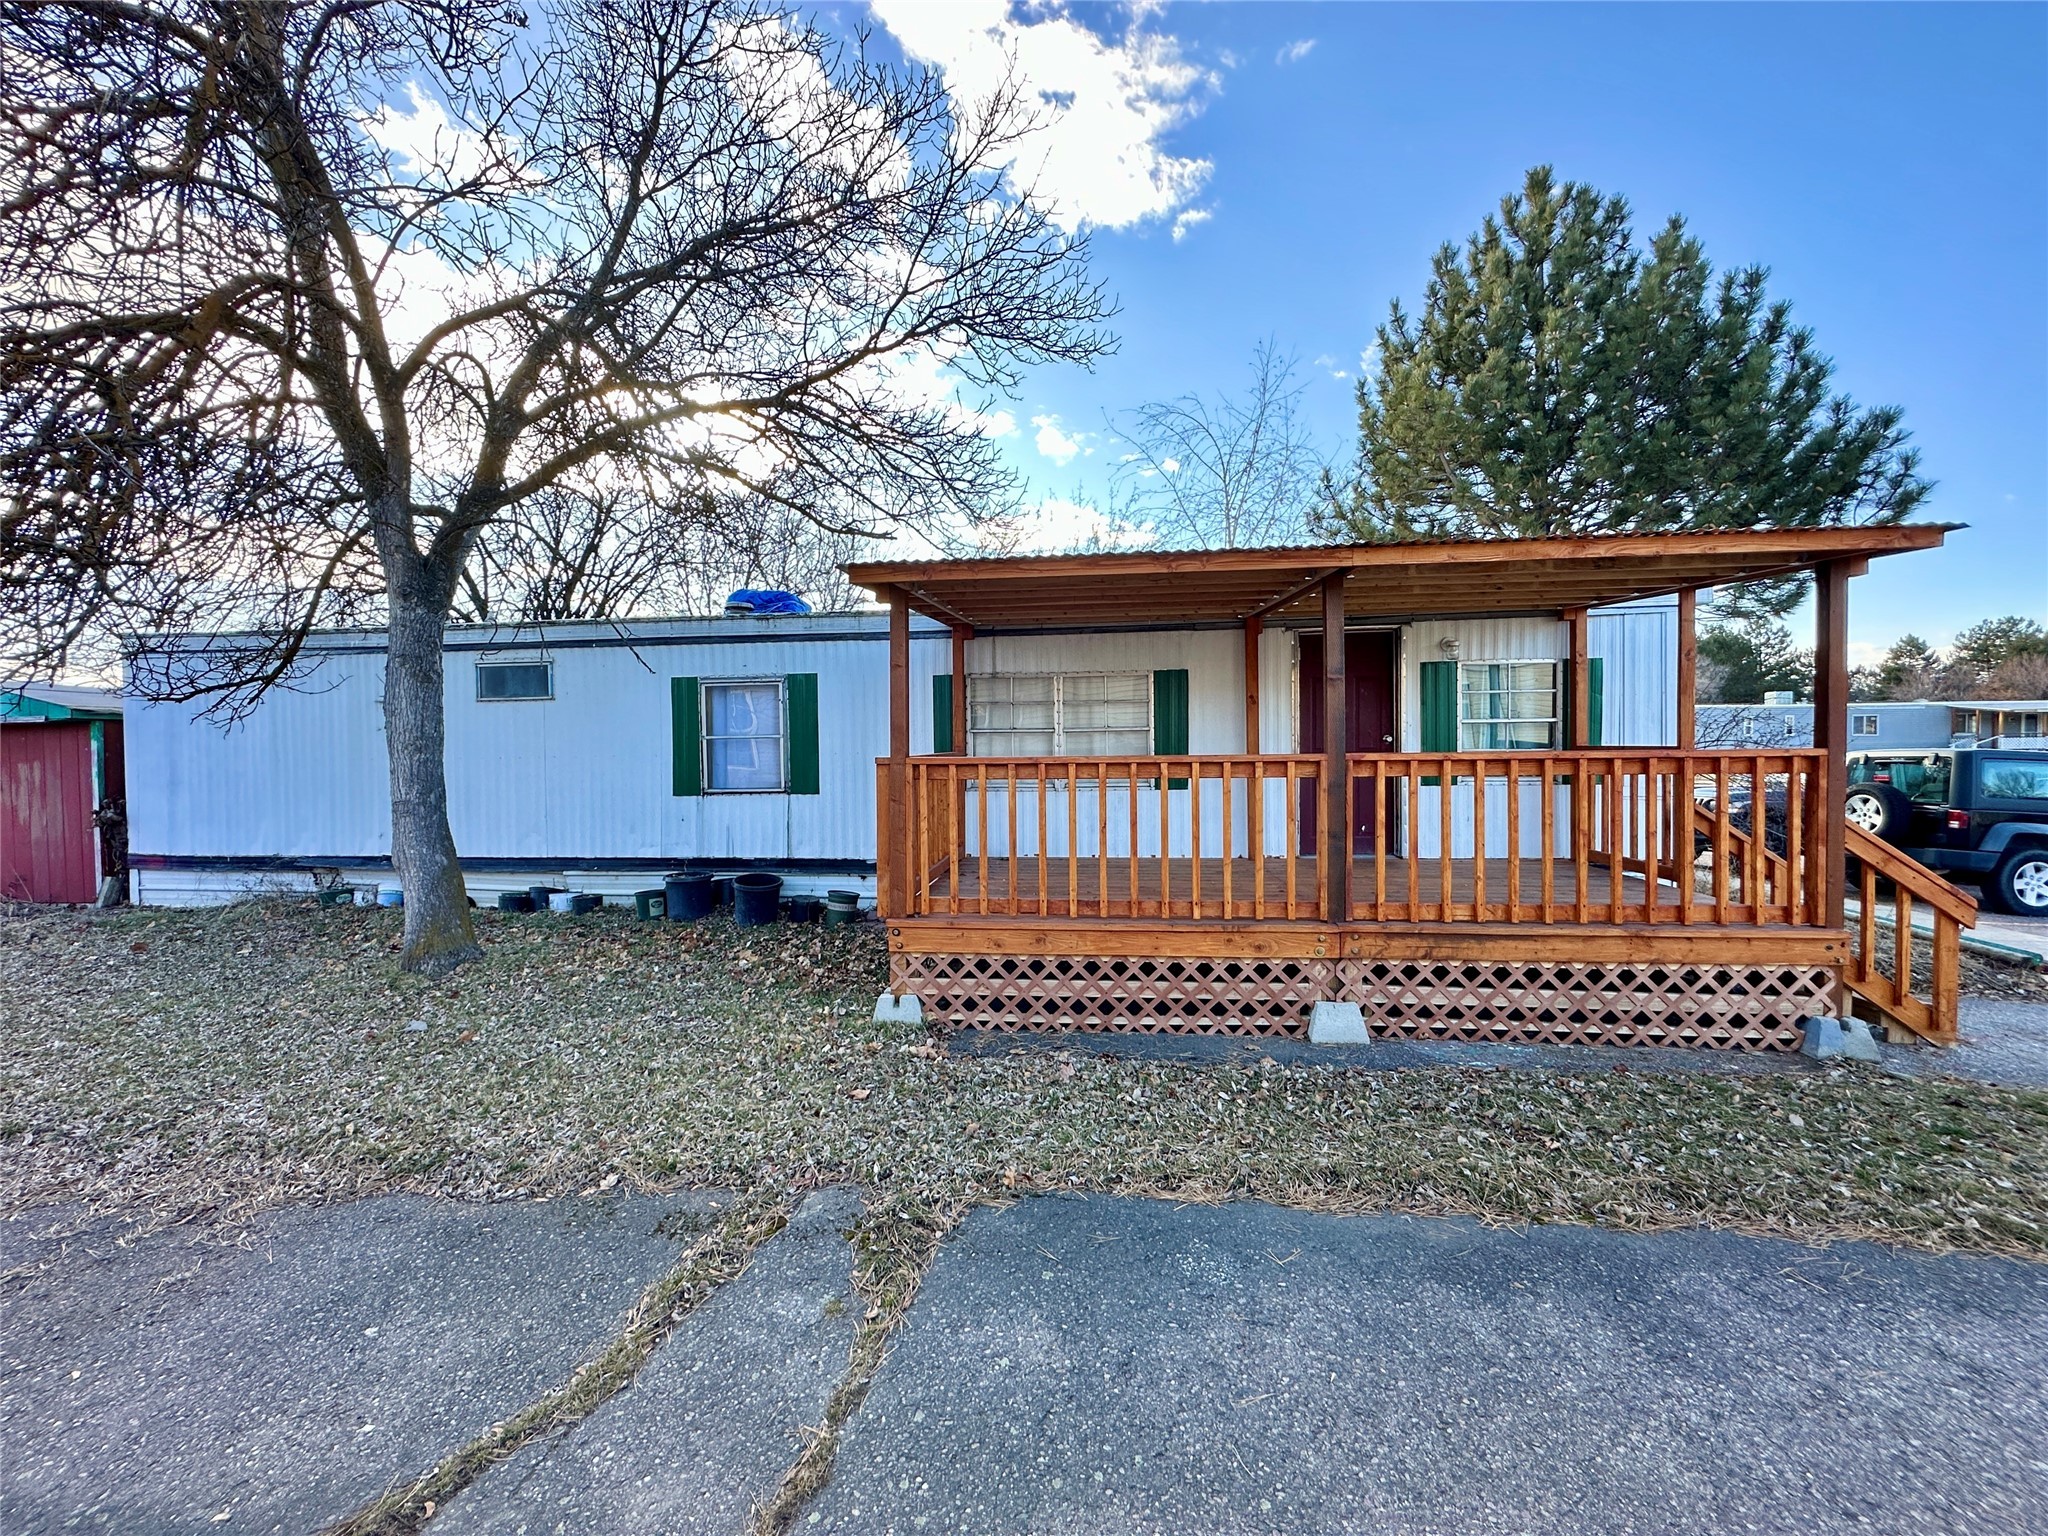 This 1972 mobile home in Travois Village has two bedrooms and one bathroom and is ready for a new owner. The front porch is covered, and there is a storage shed out back. With the right vision and some TLC, this could be a nice home at an attainable price. Potential buyers must apply online to be authorized, and the new lease/rules can be found in the associated documents. Current lot rent is $395.00 per month plus sewer and water (about $40). Rent includes two parking spaces and garbage removal.  This sale solely includes the mobile home; there is no accompanying land. Home is not built on a solid foundation. Financing may be available for qualifying purchasers through a local lender. Call Jason Shreder at 406-370-4436 or your real estate professional.